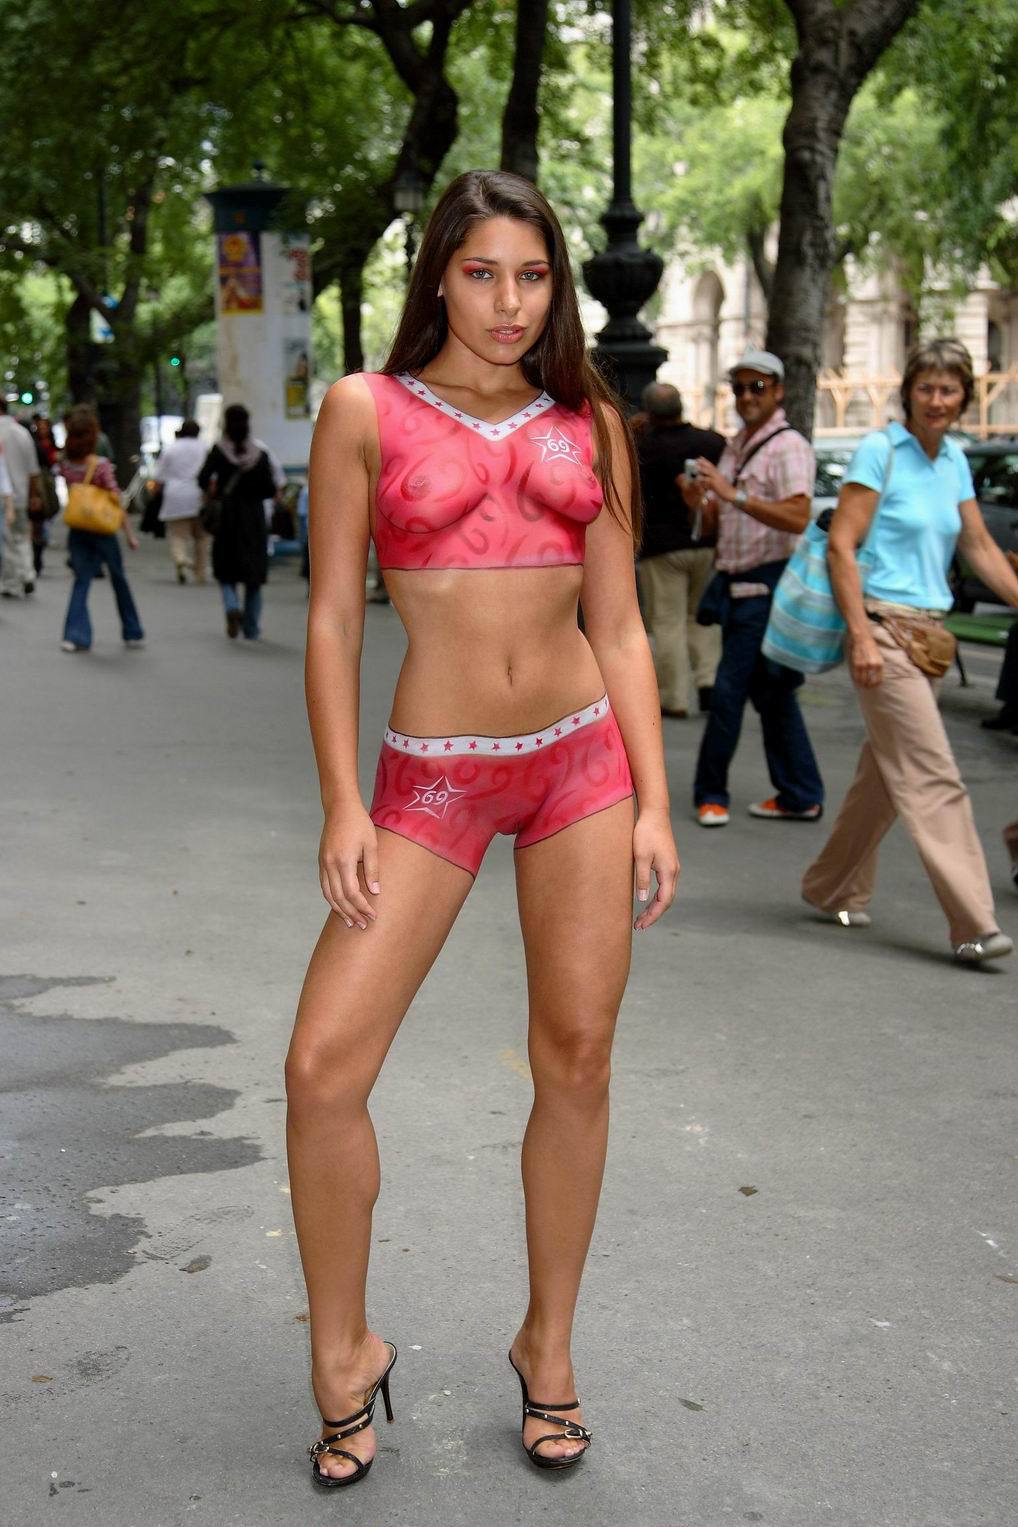 hot eighteen year old latina takes it all #Kari #Watch4Beauty #Playground #LegsSpread #Nude #Public #Outdoors #ShavedPussy #Brunette